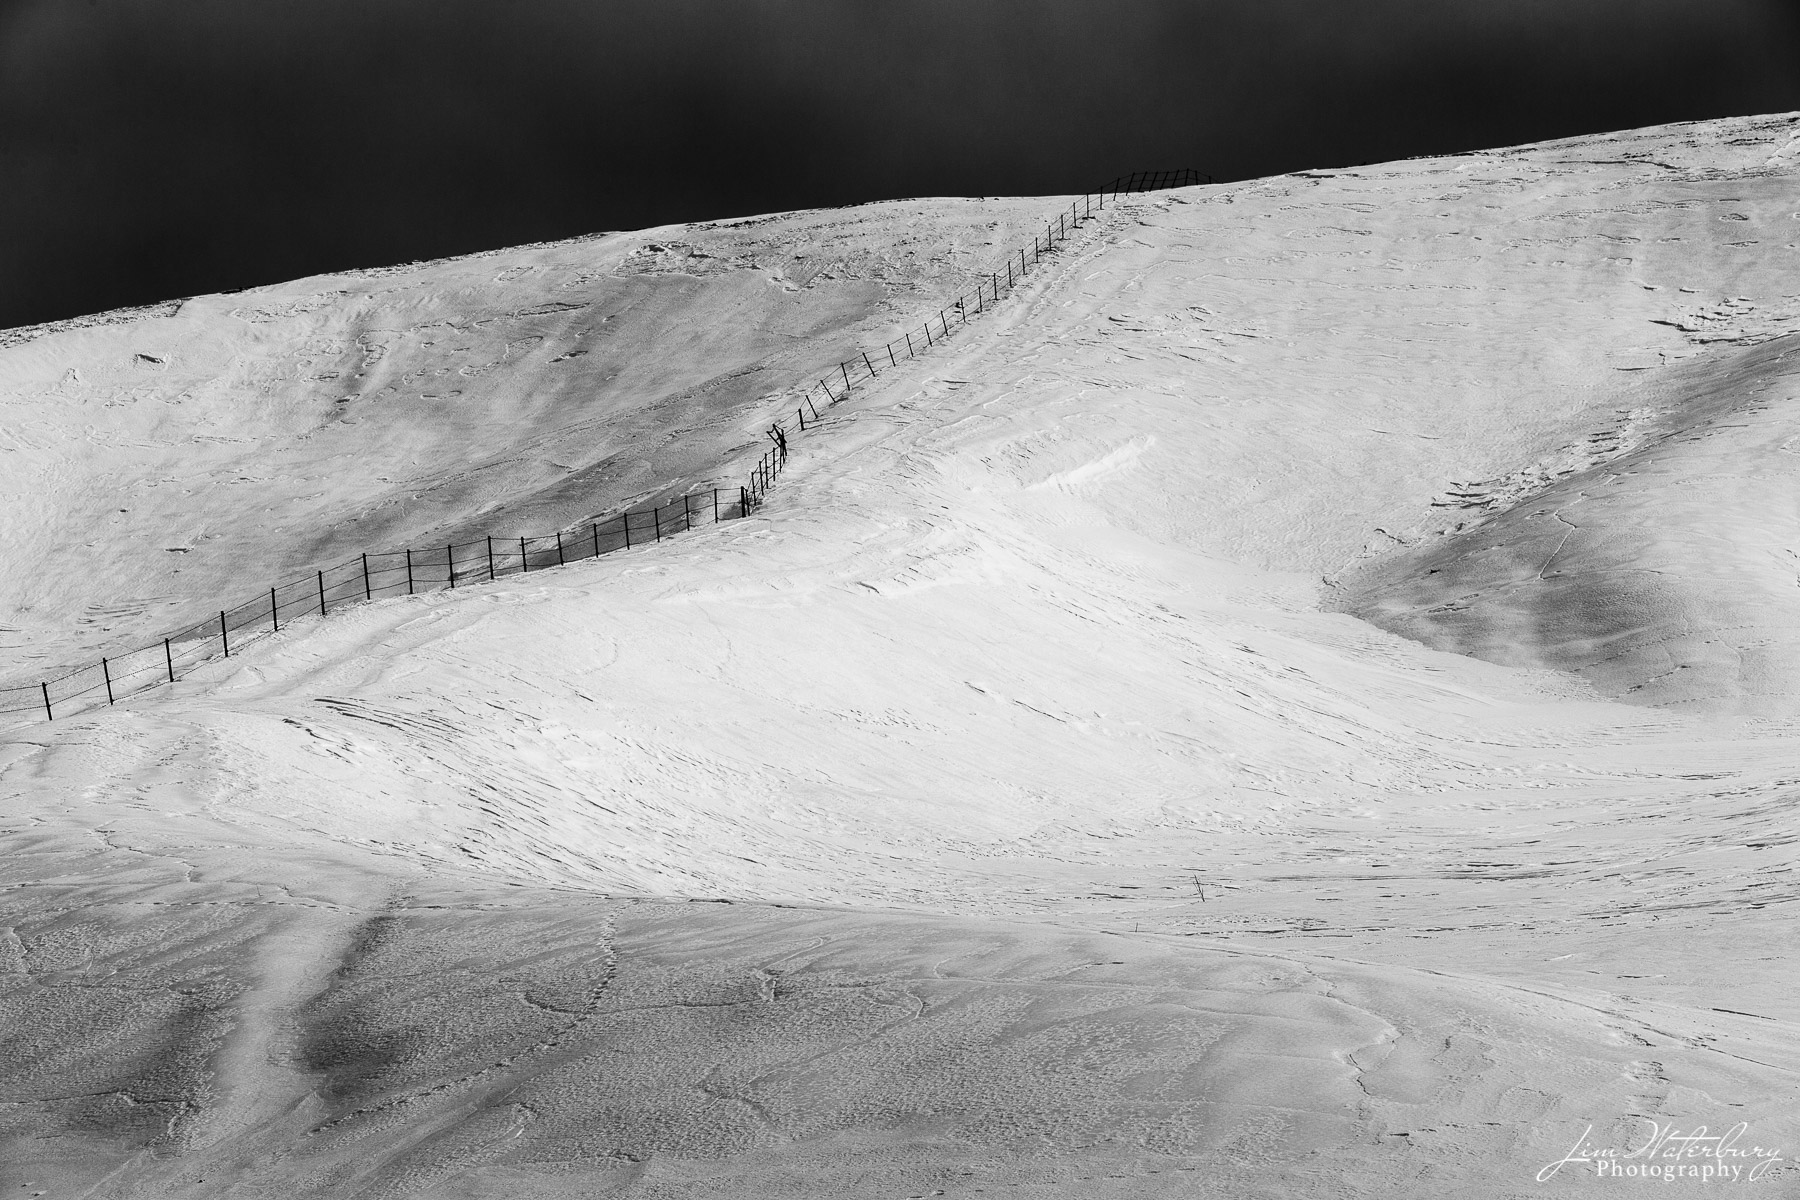 Black & white image of a steep, snow-covered hill in Hokkaido, Japan, divided in half by a wooden fence.